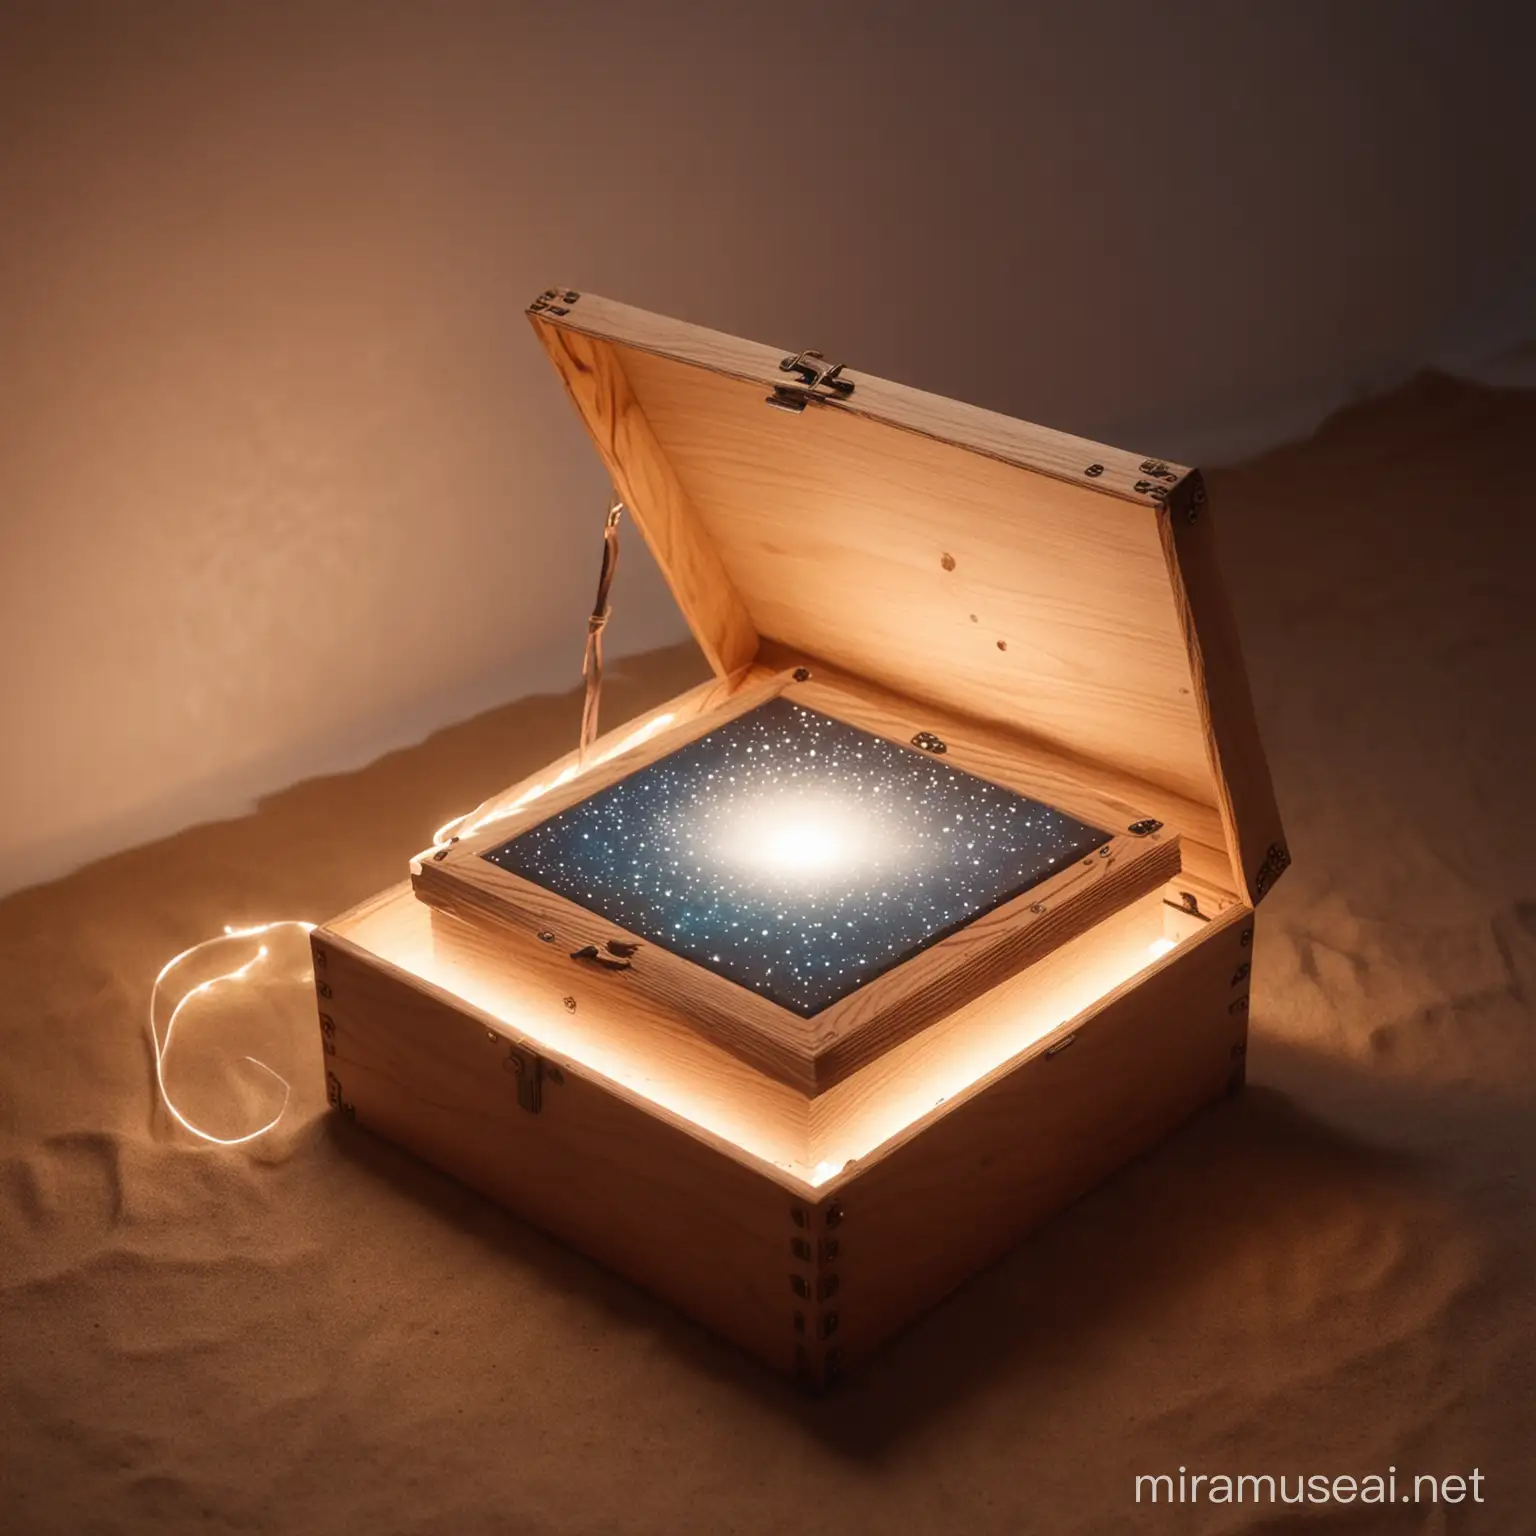 A magical Dream Box bringing light to both real and digital realm 